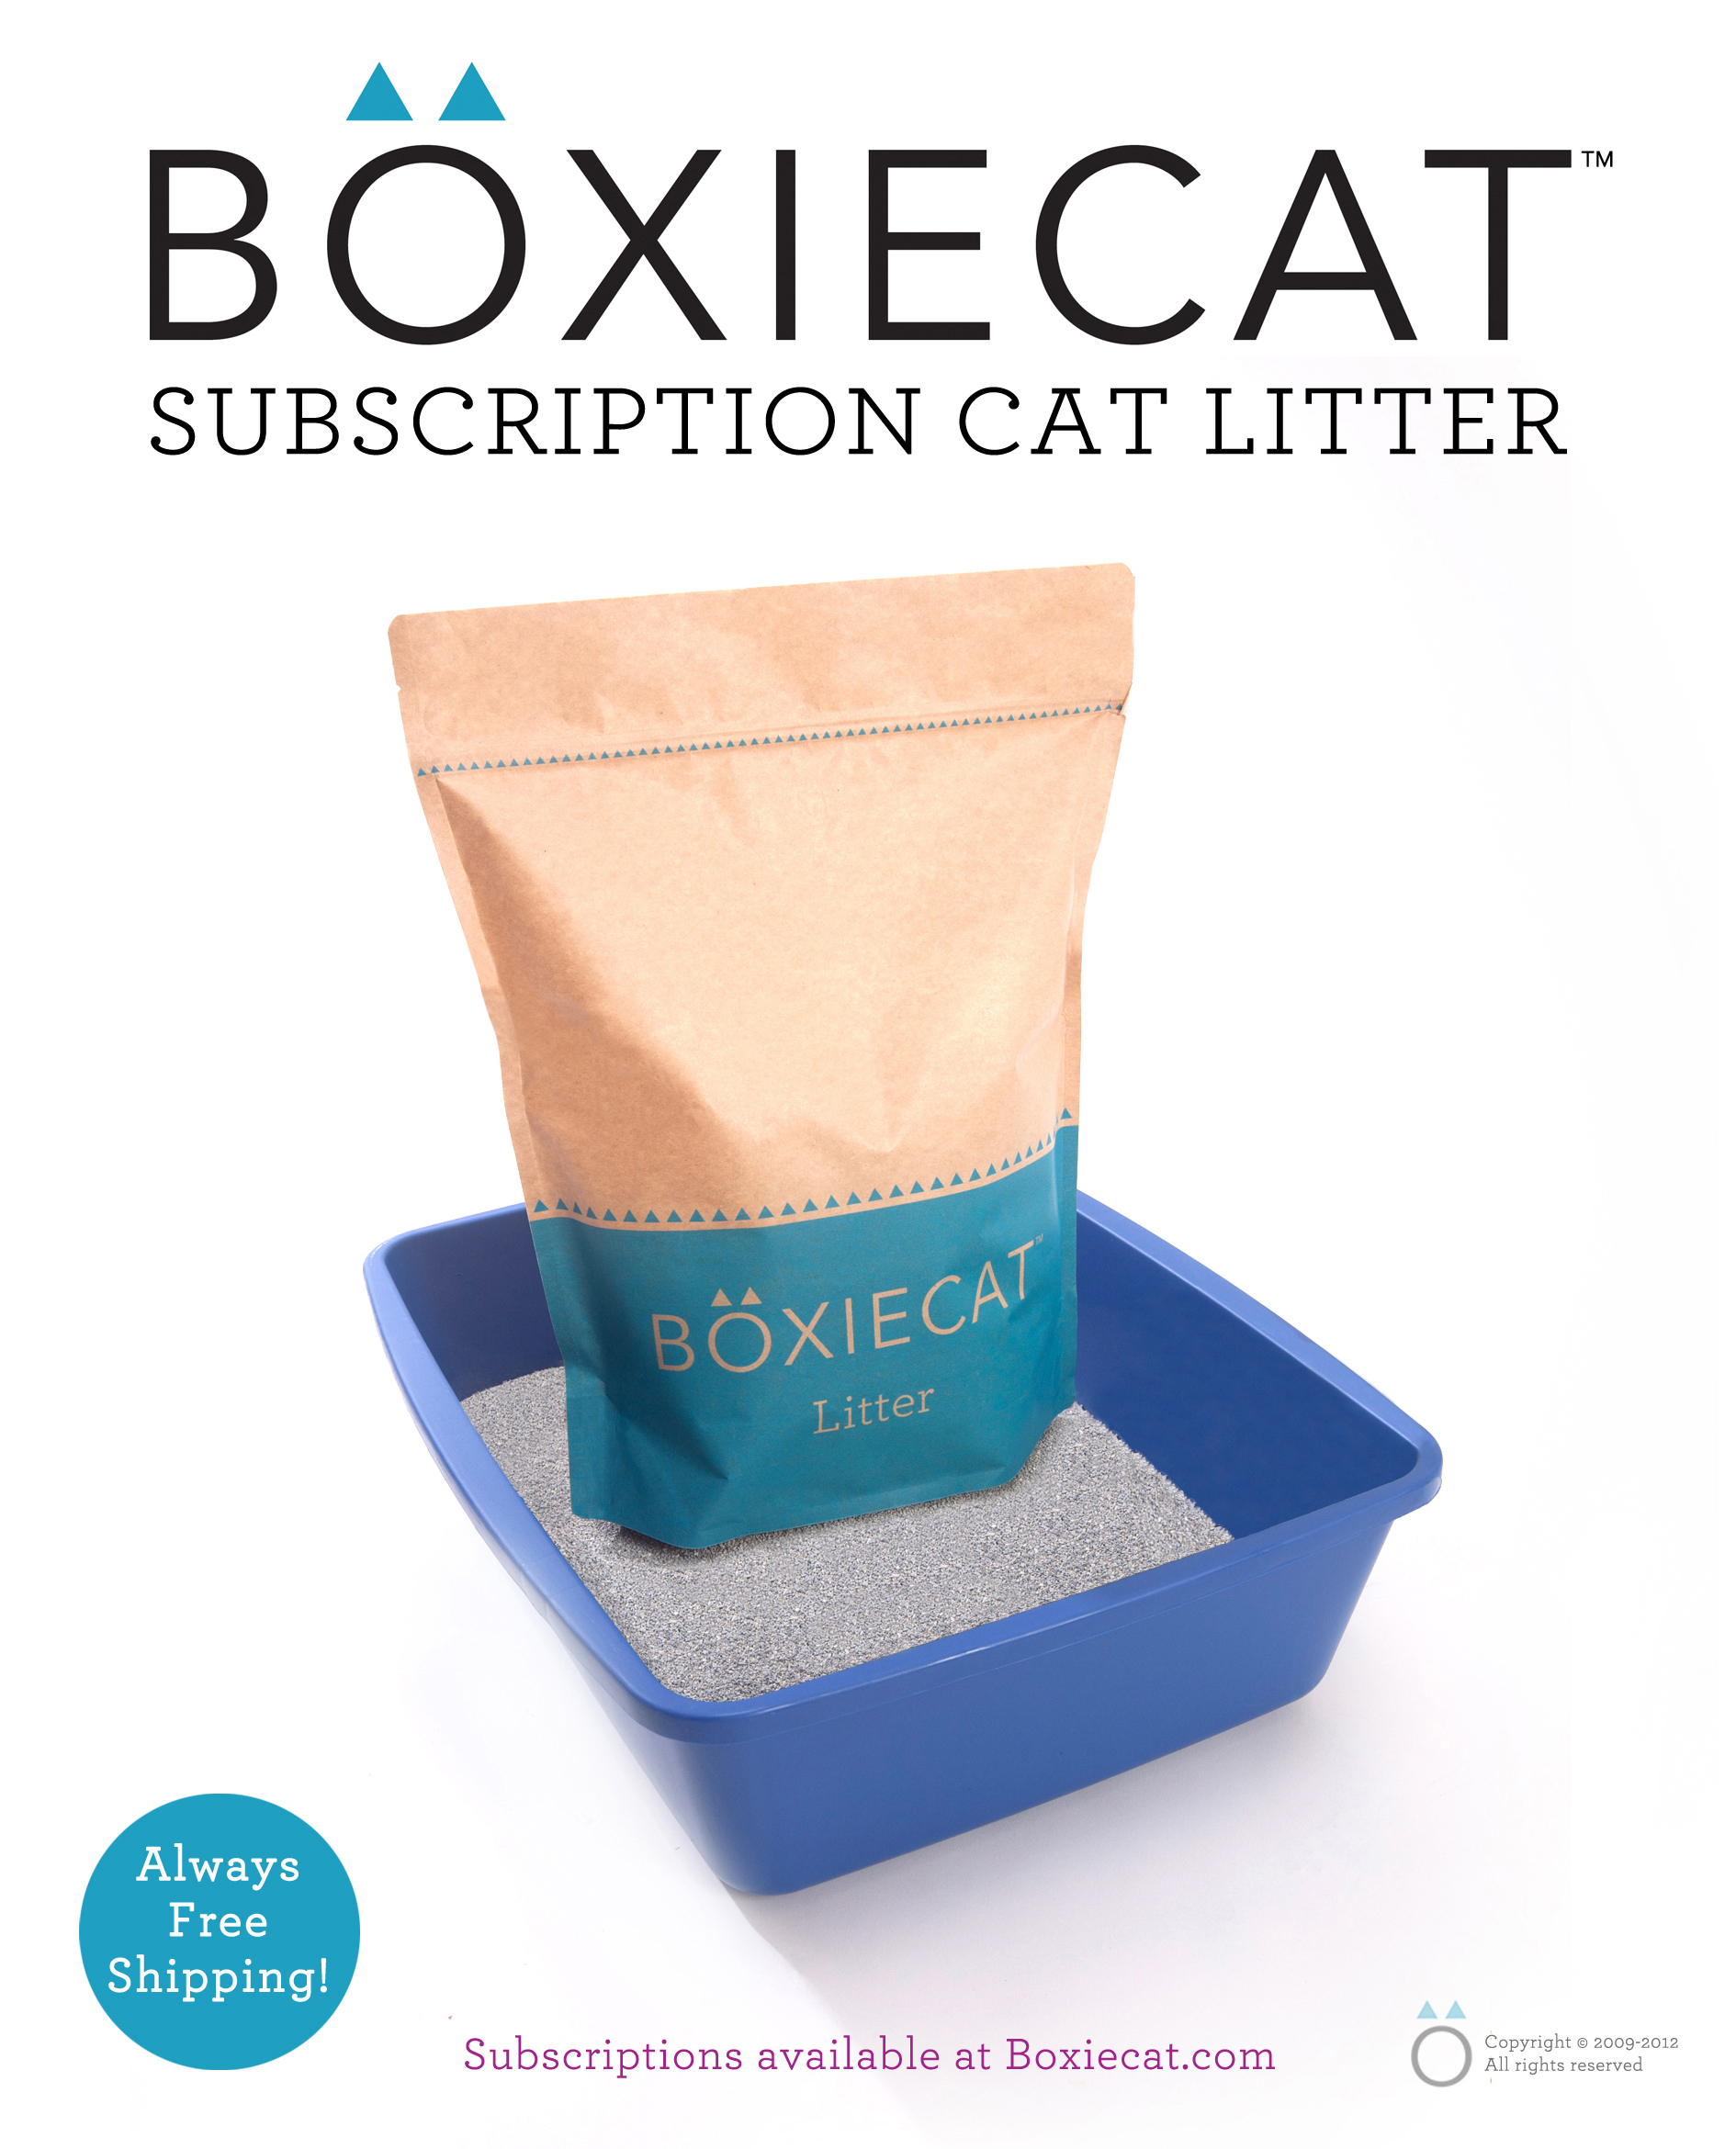 Boxiecat Debuts First Subscription Cat Litter Service